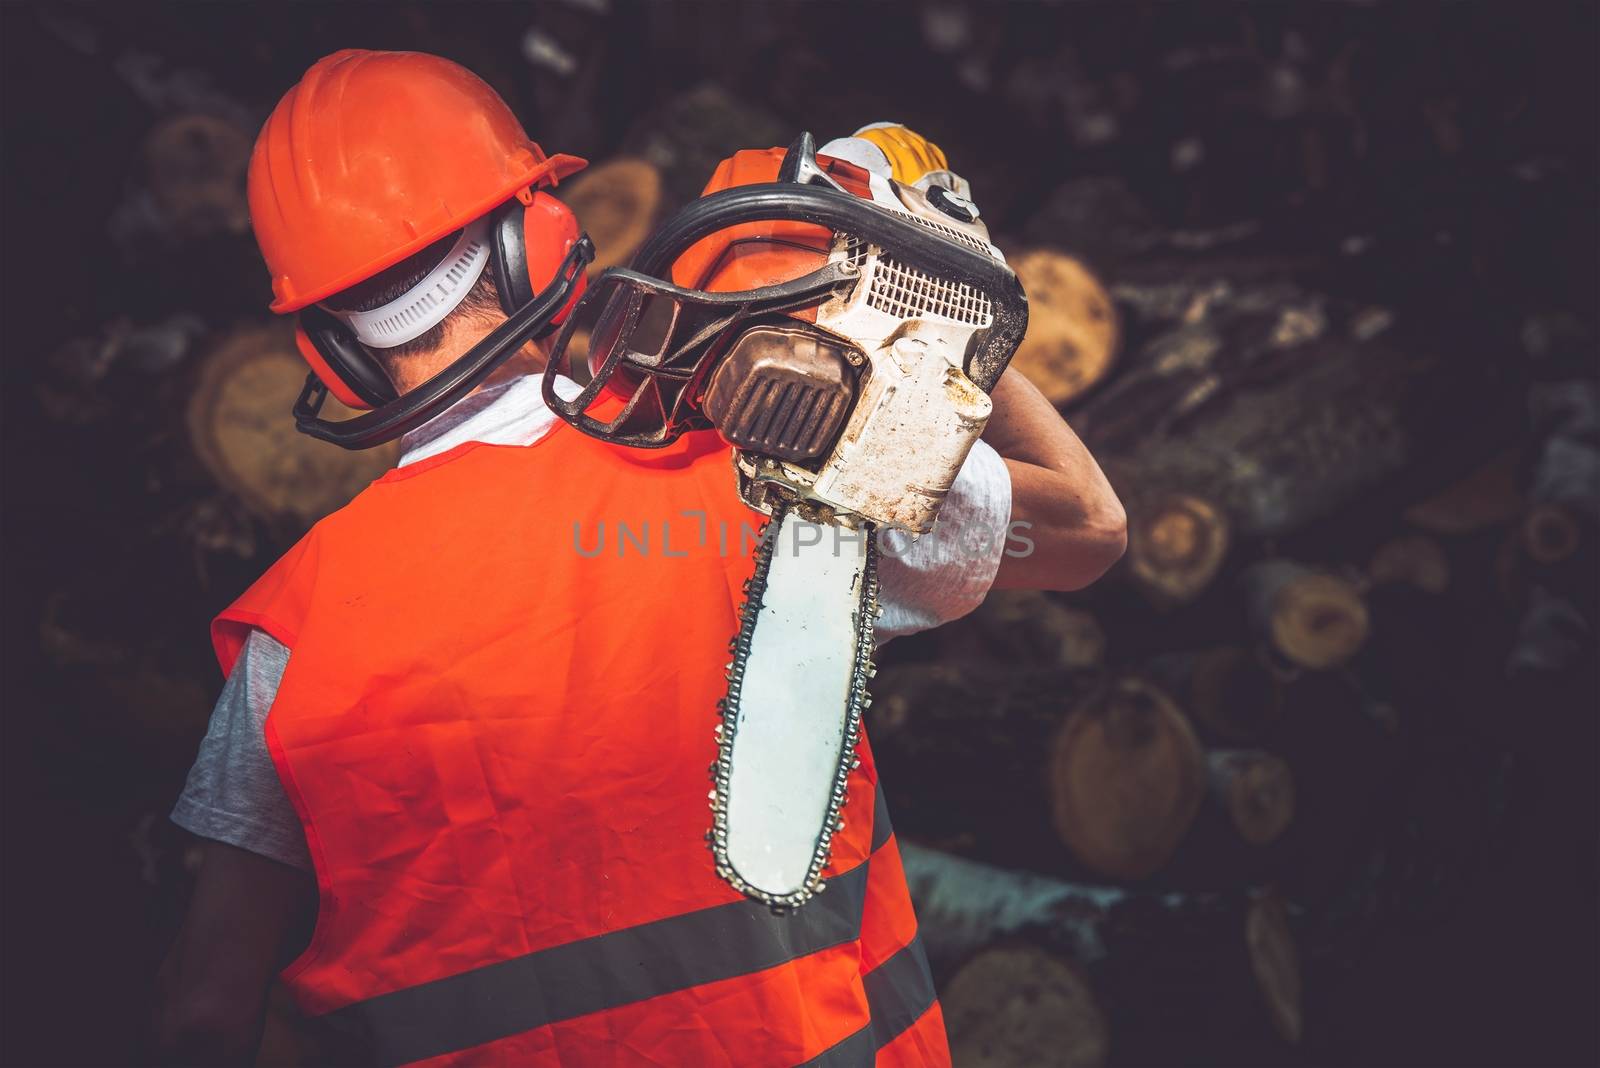 Hard Worker with Wood Cutter. Labor Concept Photo. Lumber Industry.